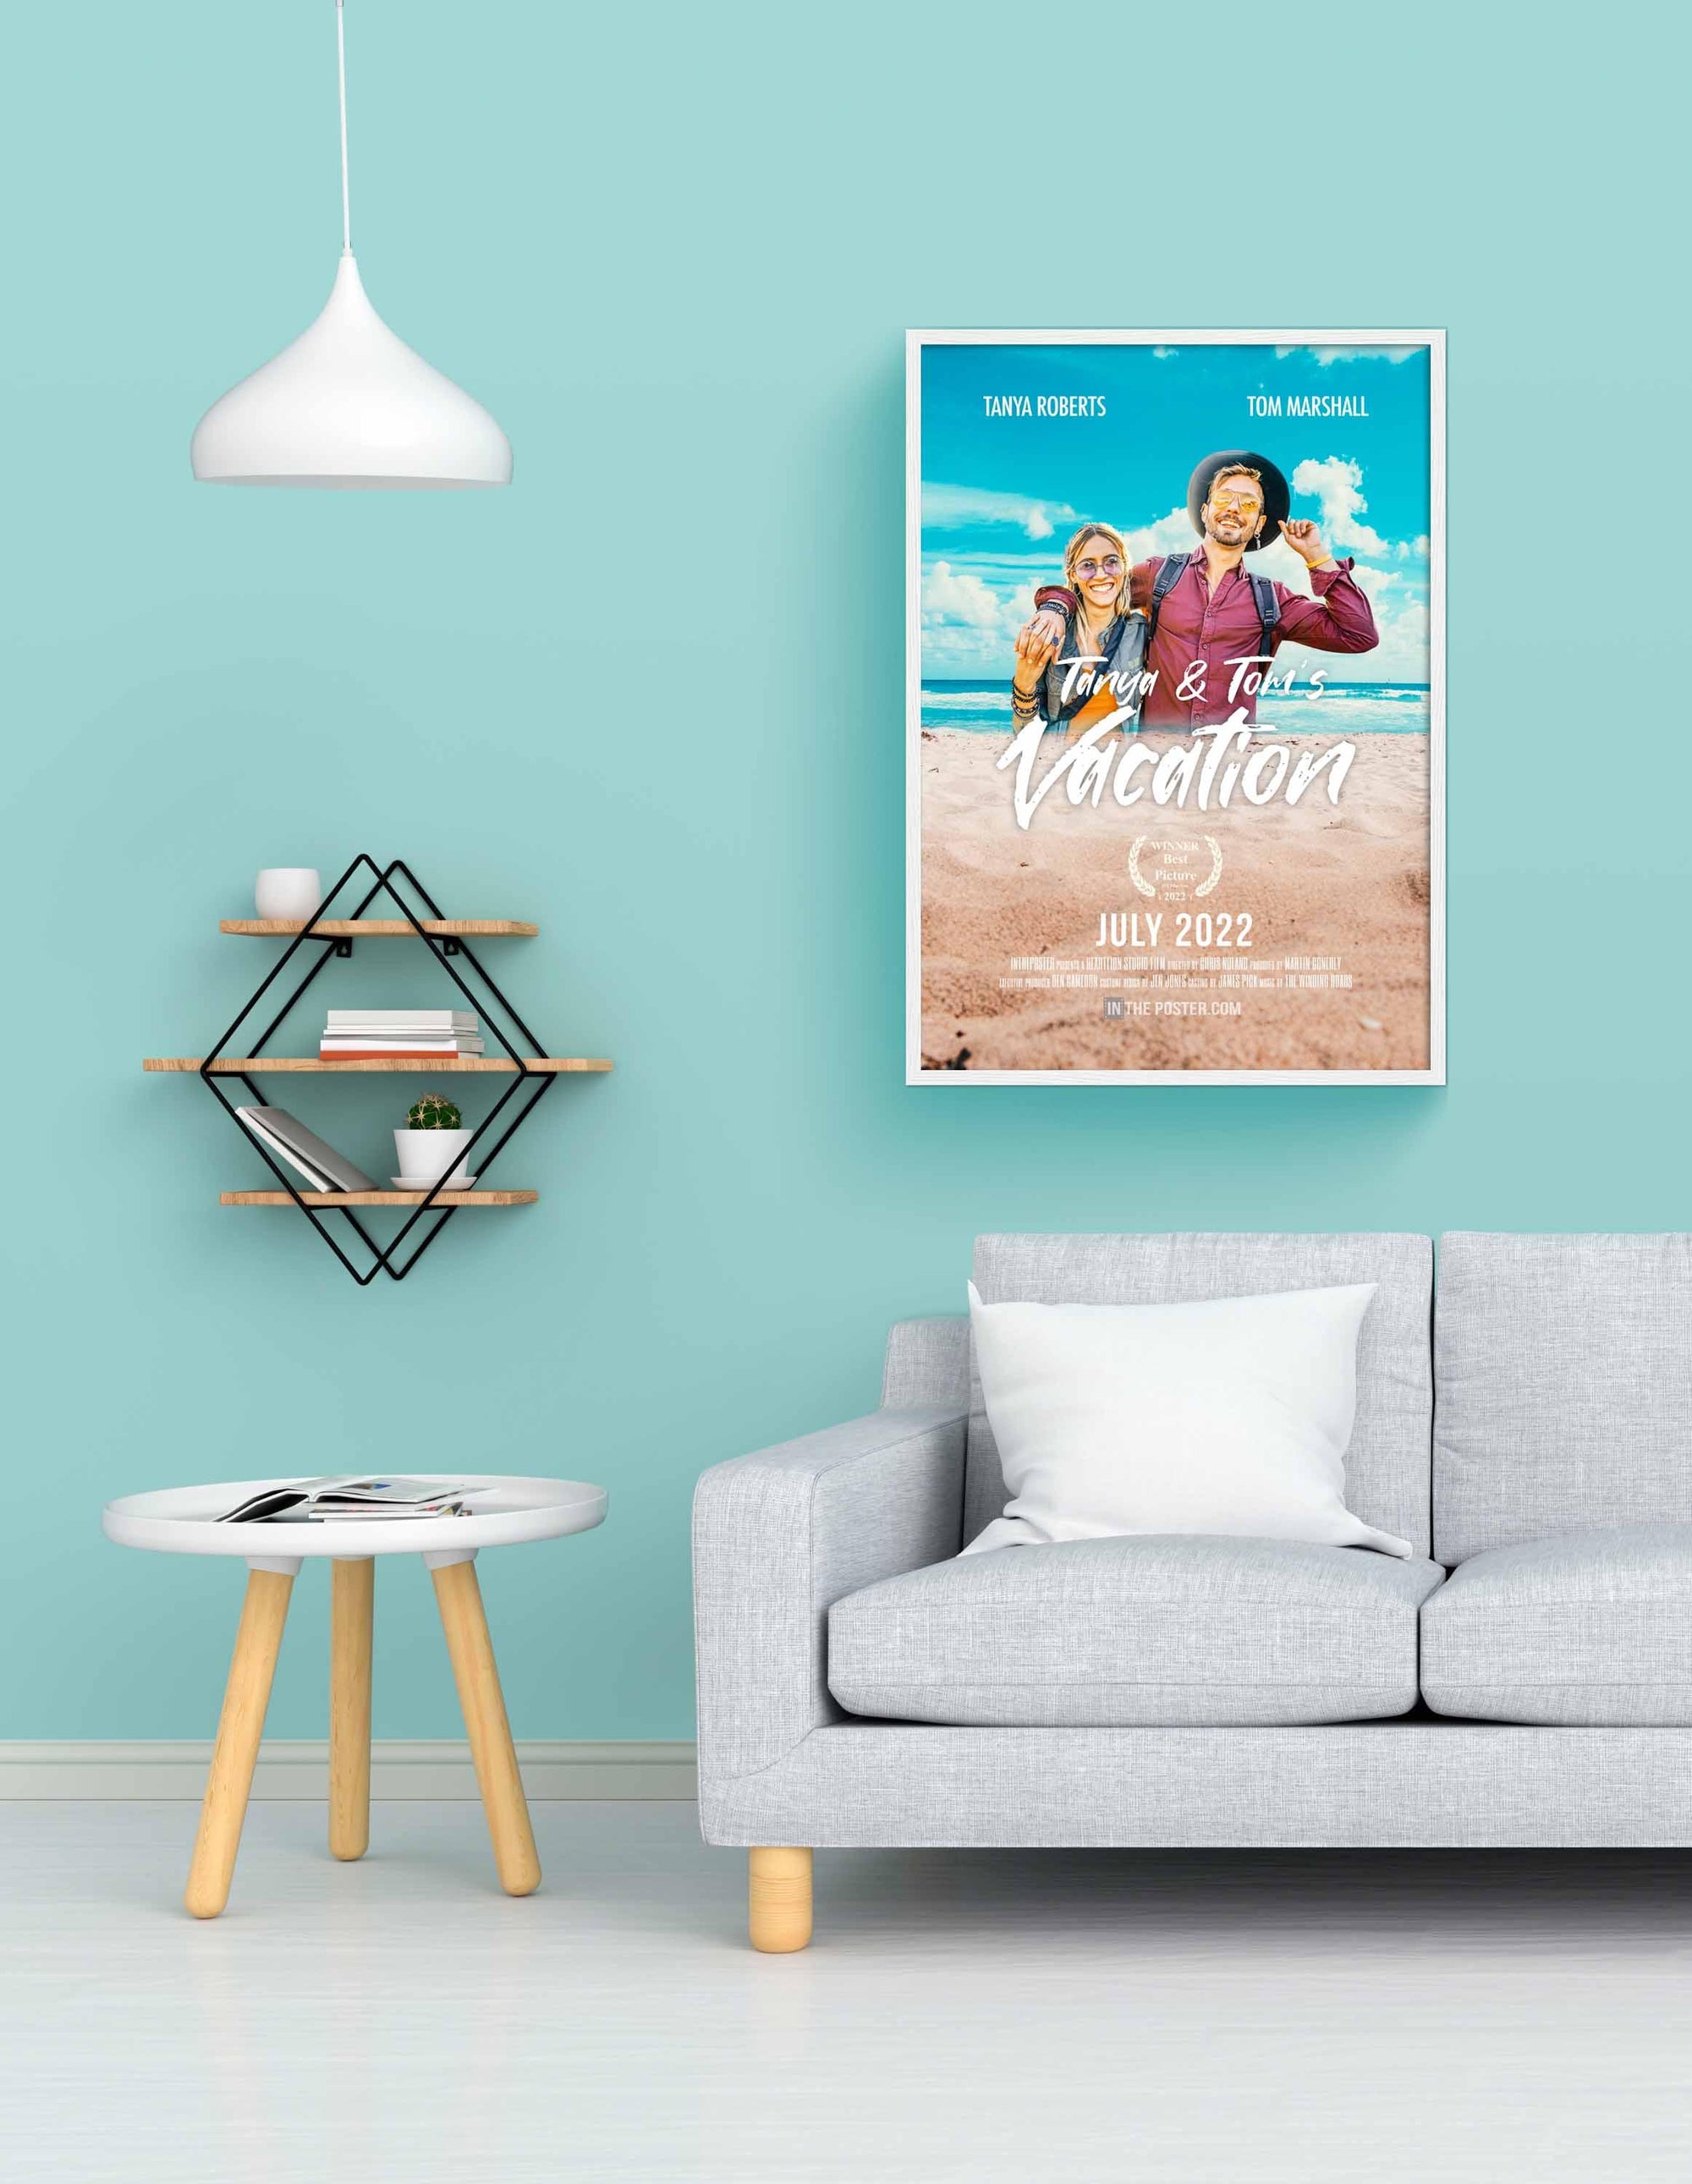 The Vacation Custom Movie Poster with travel buddies in a white picture frame on a blue wall above a grey sofa